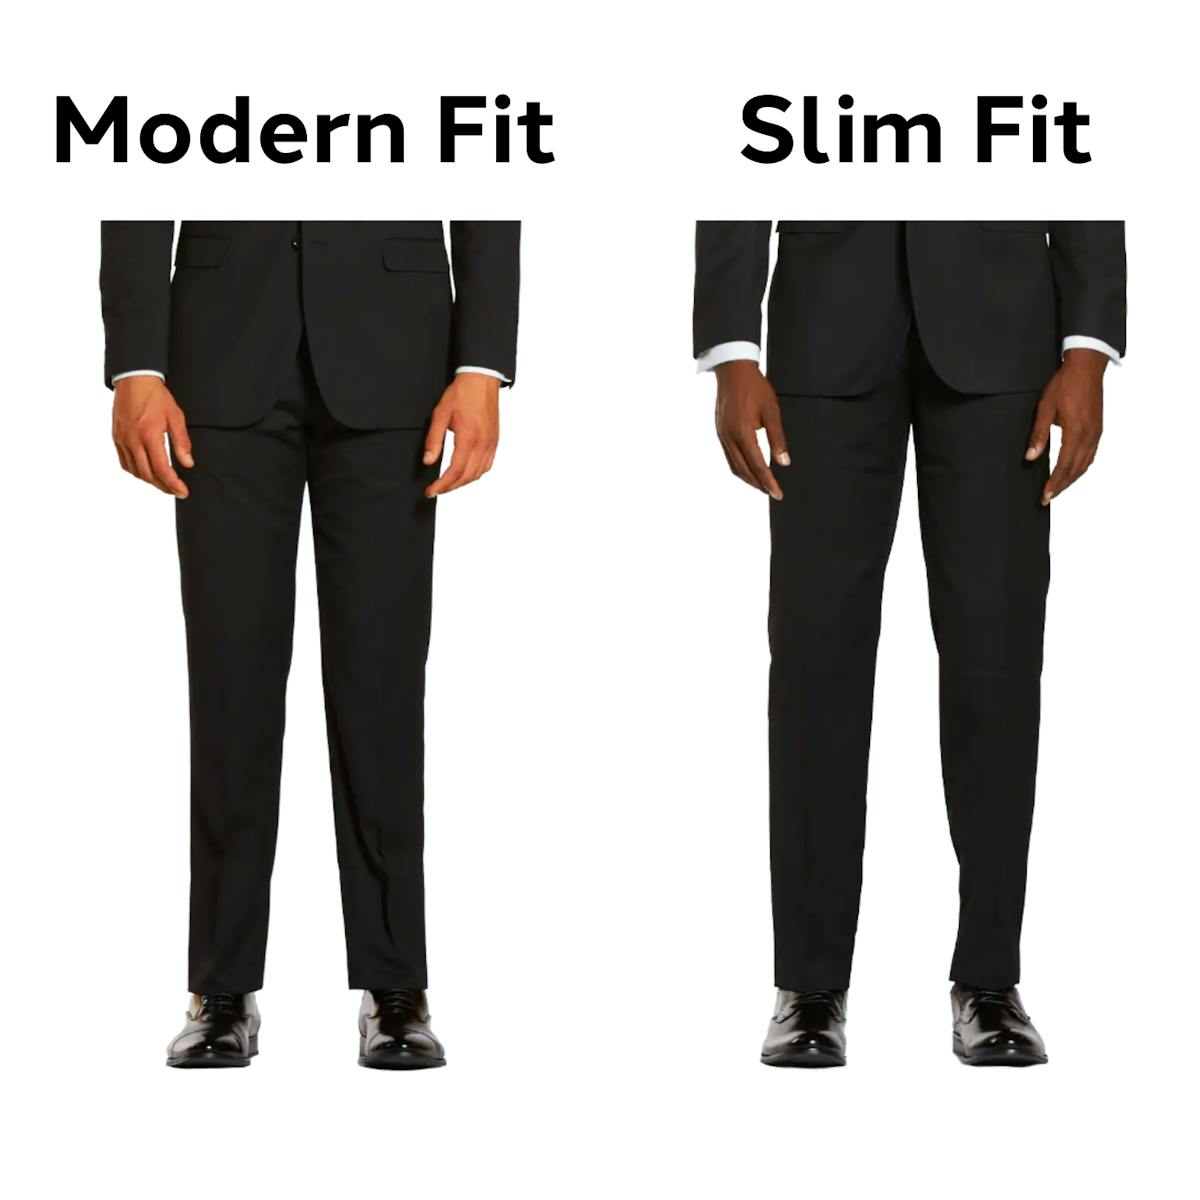 The difference between Modern Fit vs Slim Fit Pants, Modern Cut vs Fit Cut Pants, Modern vs Slim Pants